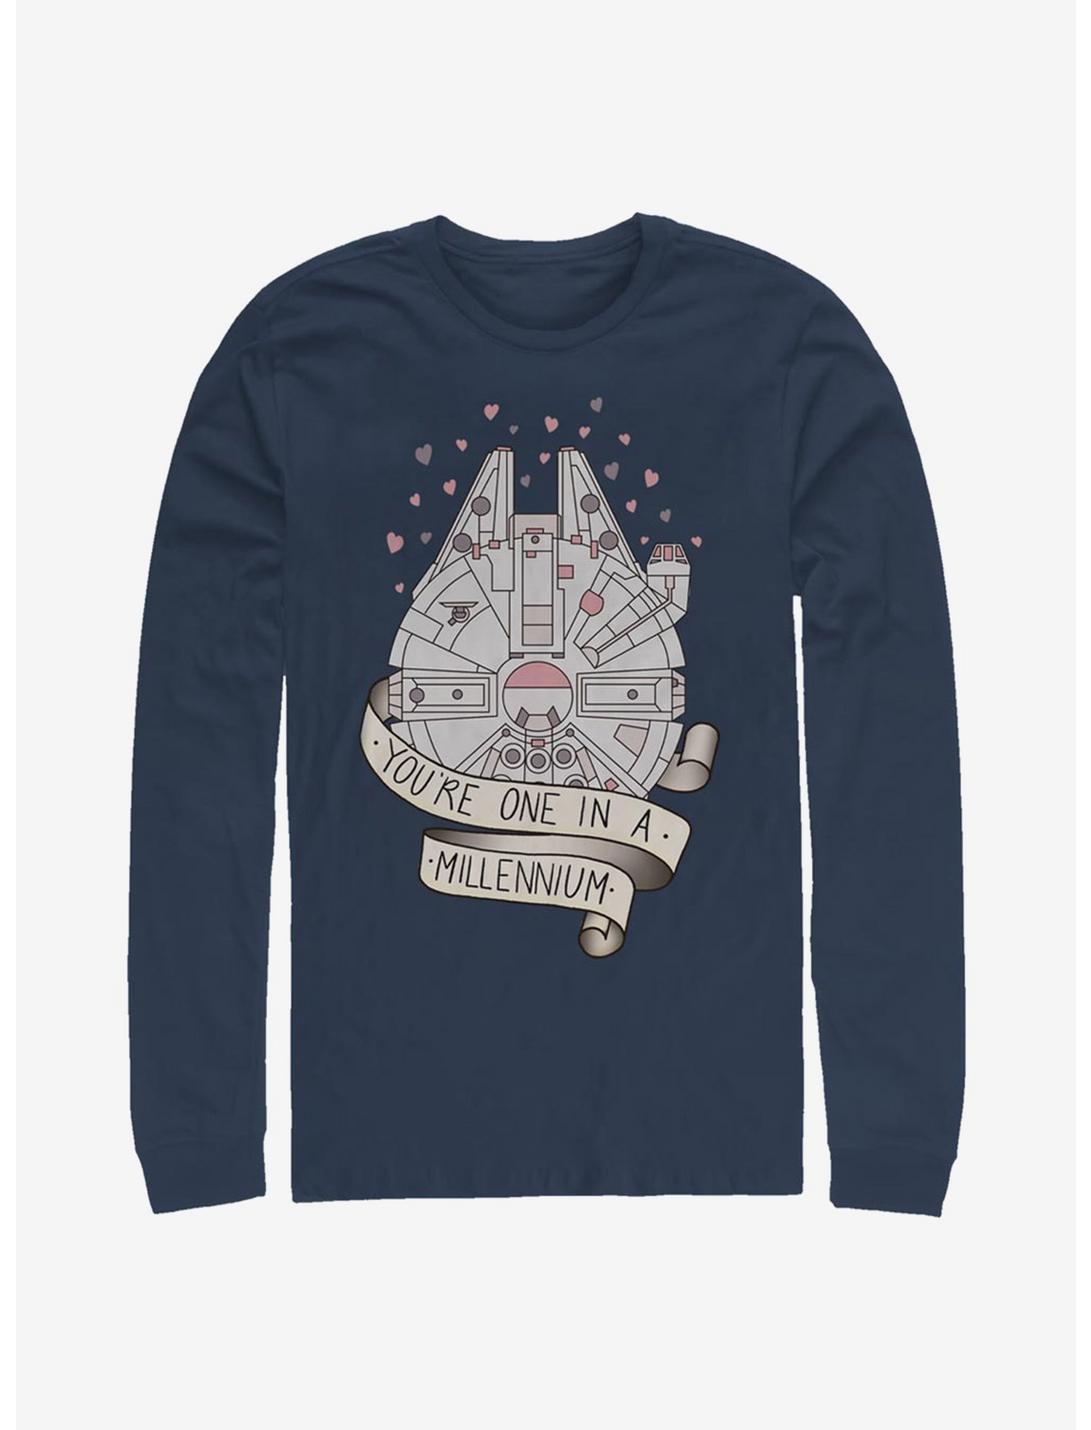 Star Wars One In A Millenium Long-Sleeve T-Shirt, NAVY, hi-res